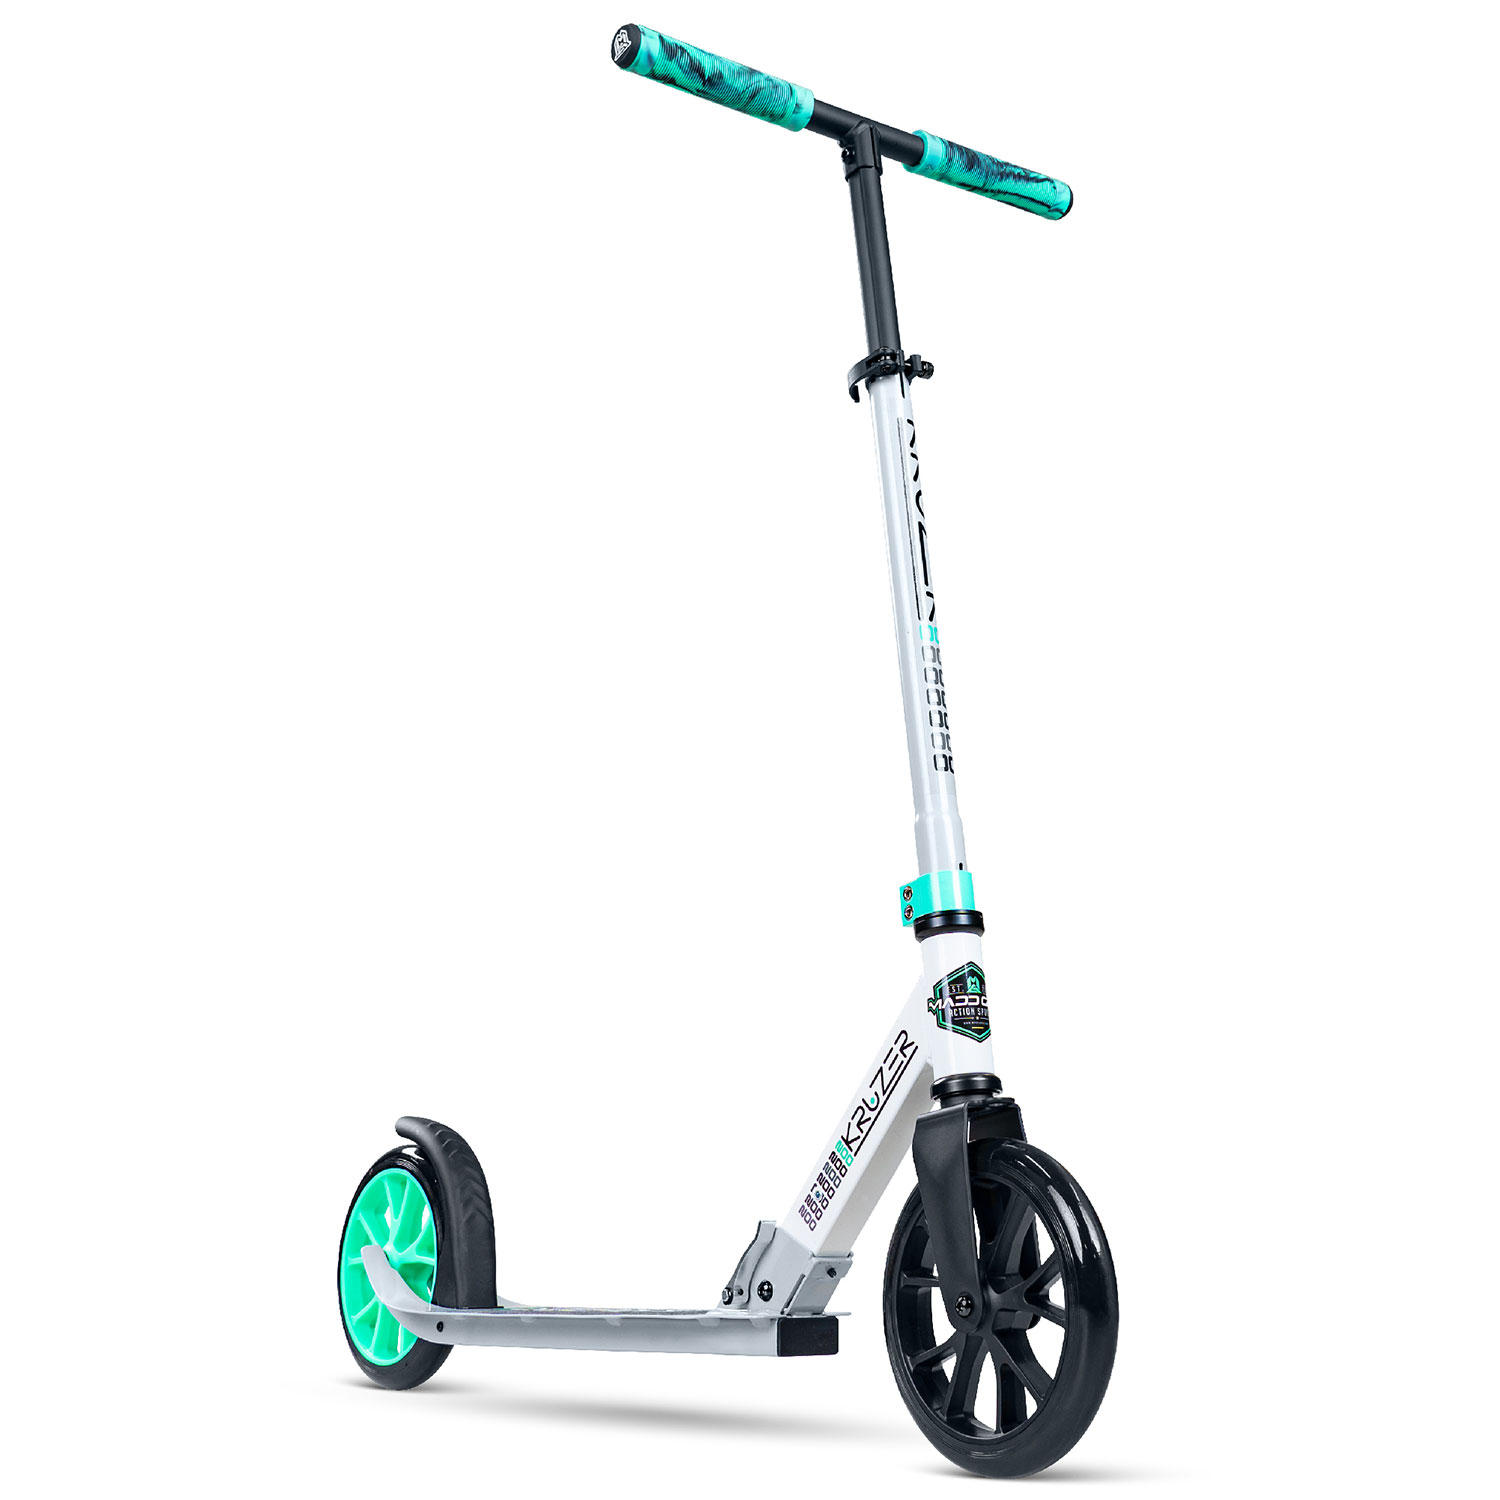 Madd Gear Kruzer 200mm - Suits Ages 5+ - Max Rider Weight 220lbs - Folding And Height Adjustable Commuter Scooter - 3